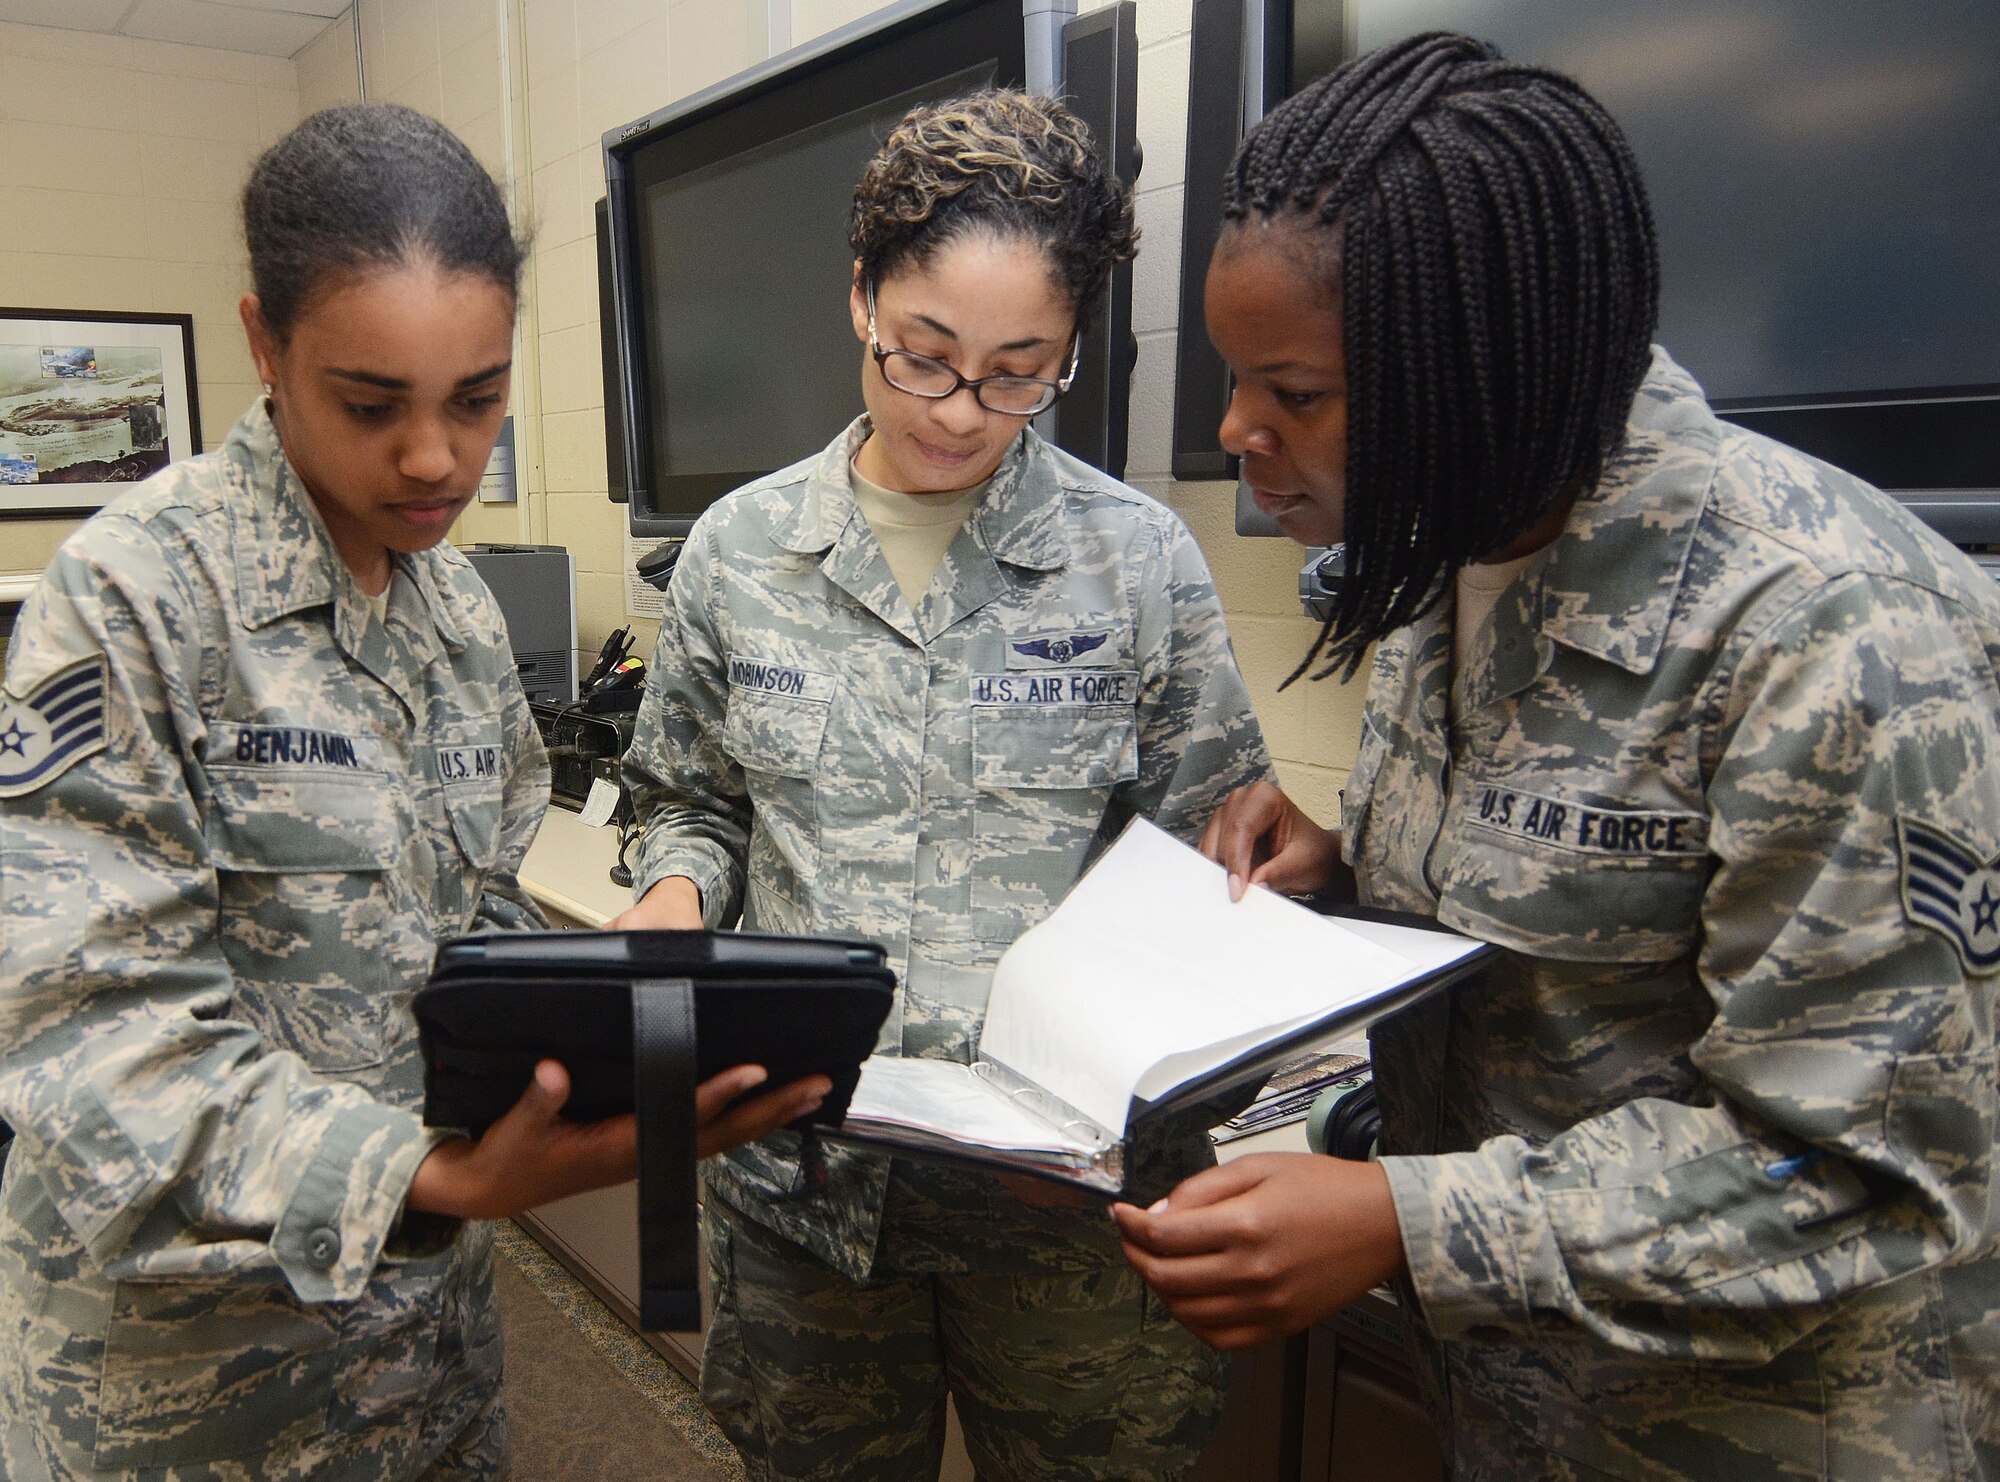 Staff Sgt. Chantel Benjamin, Tech. Sgt. Susan Robinson, and Staff Sgt. Stephanie Lee from the 700th Airlift Squadron, get hands-on experience on the Mobile Mission Kit during its test phase on Dobbins Air Reserve Base, Ga. Sept. 30, 2015. The device is designed to capture a wide variety of accurate and timely mission data using a paperless and real-time process, reducing crew workload, saving costs and improving overall efficiency before, during and after flying missions. (U.S. Air Force photo/Don Peek)